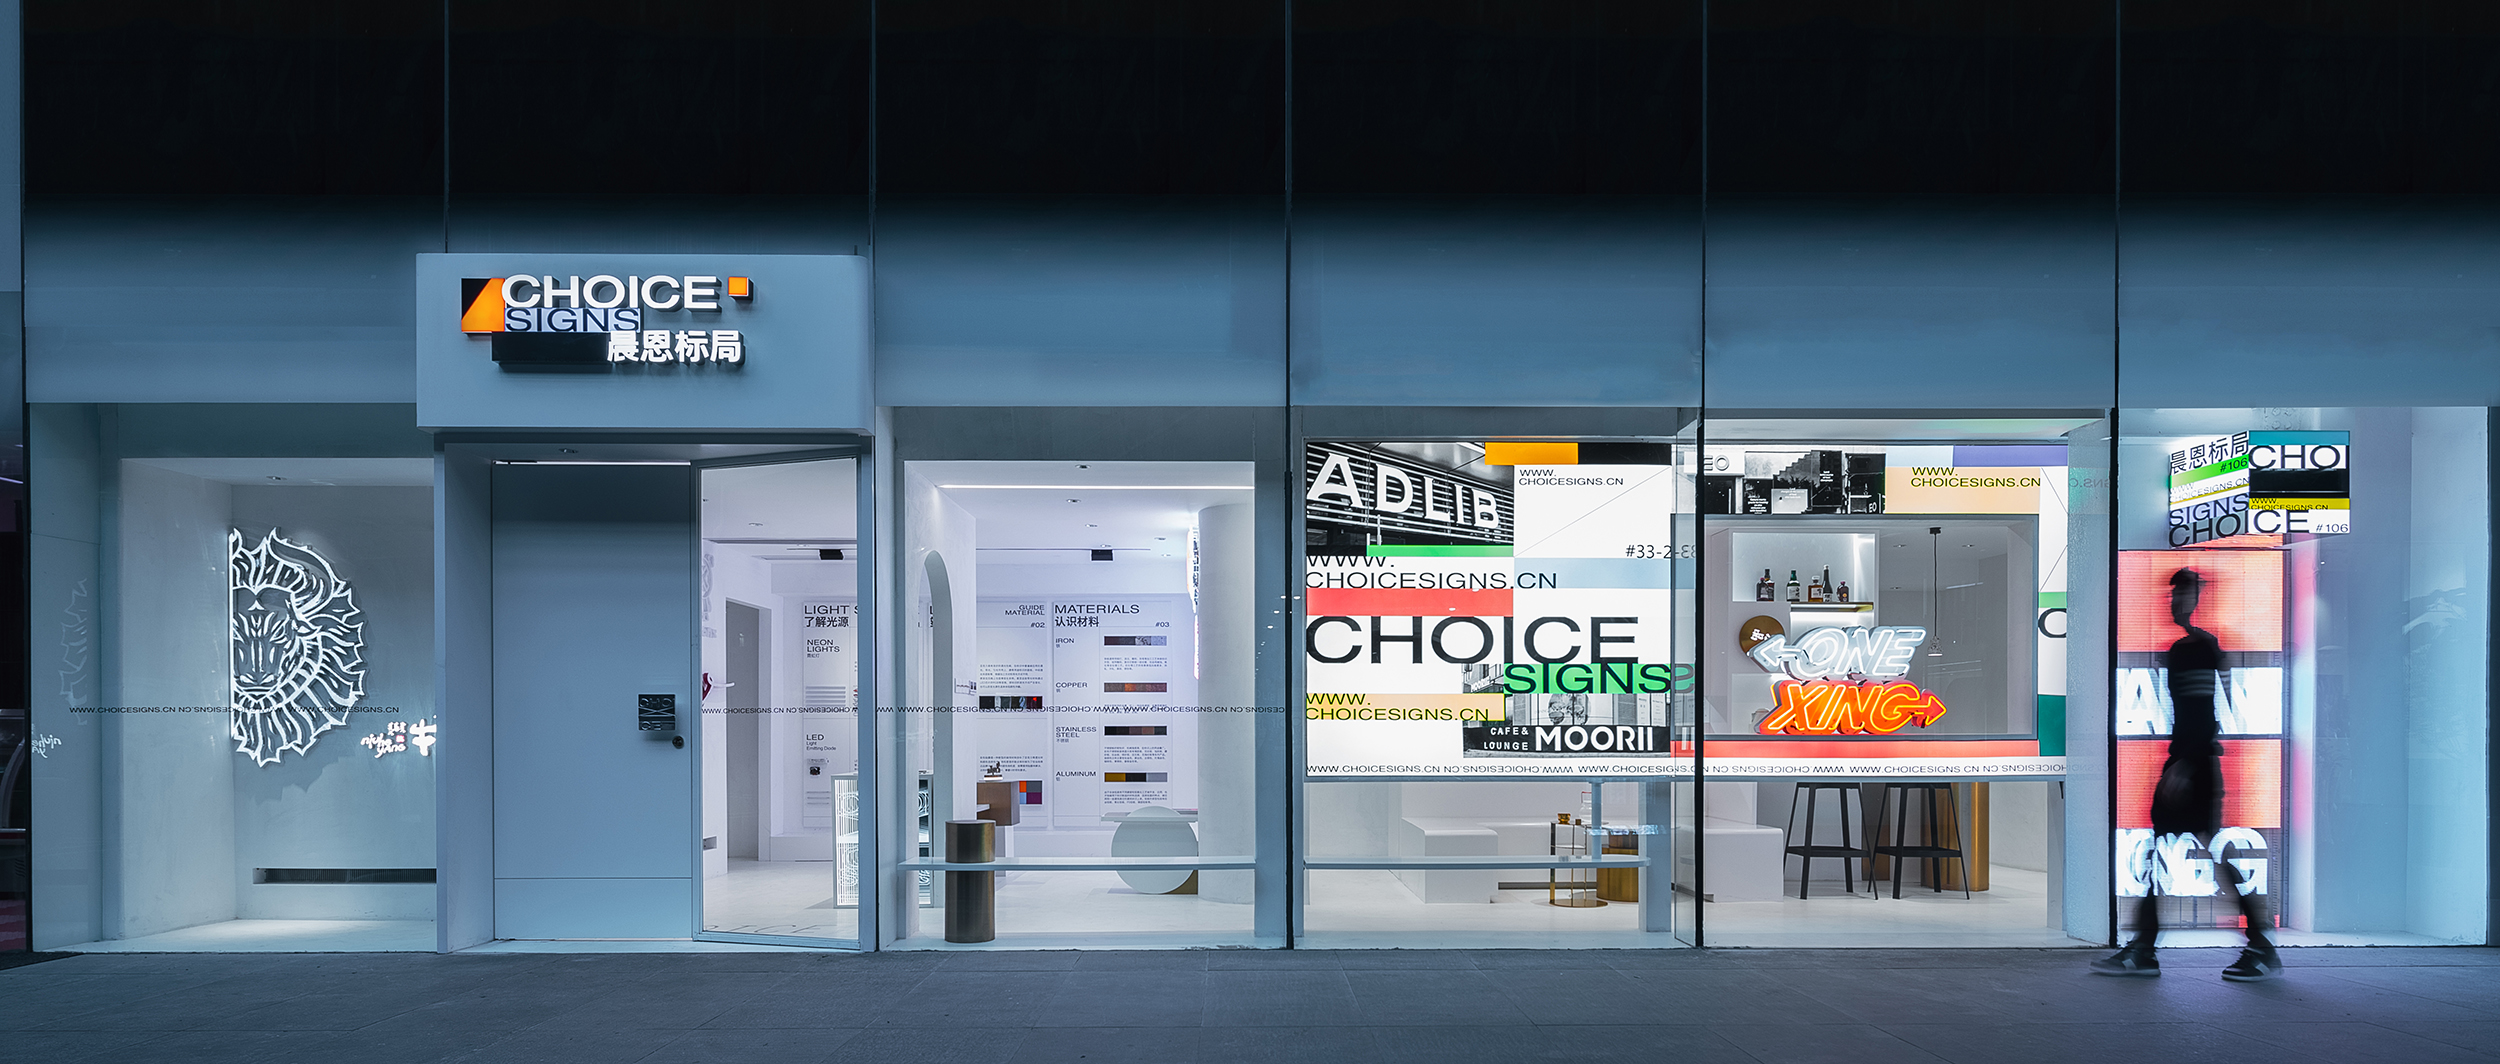 MUSE Design Winners - Choice Signs